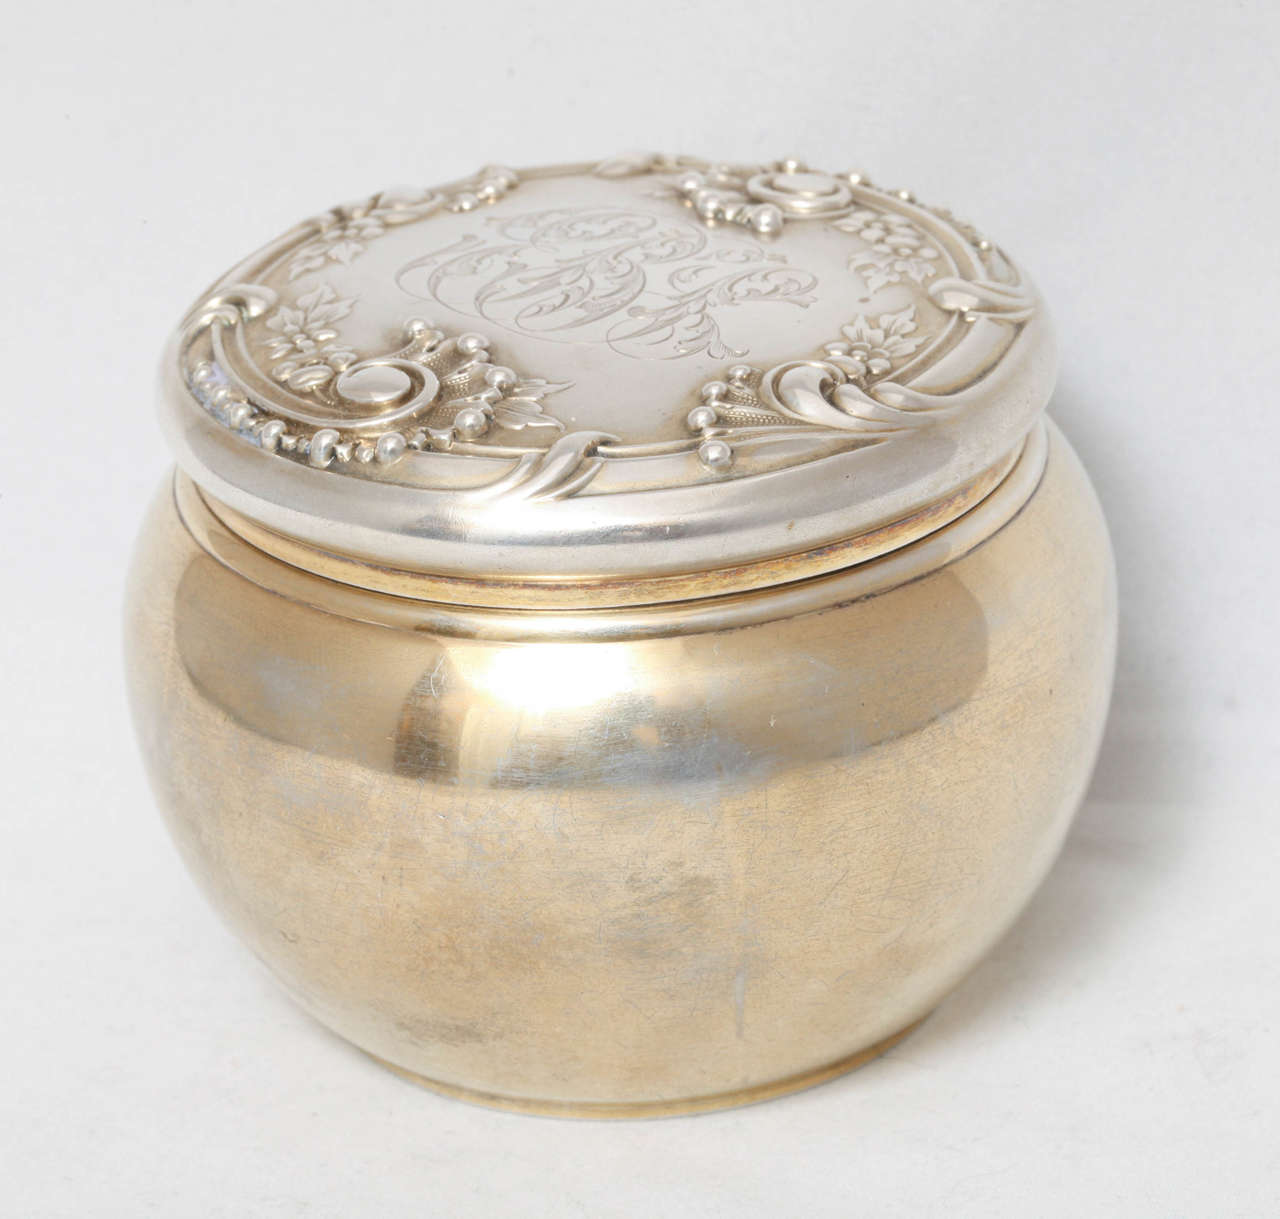 Unusual, Victorian, beautiful, all sterling silver gilt dresser jar, Dominick and Haff, New York, year dated for 1890. Lovely interlocking script monogram (EBS?) in centre of lid that looks like part of the design. Measures: 3